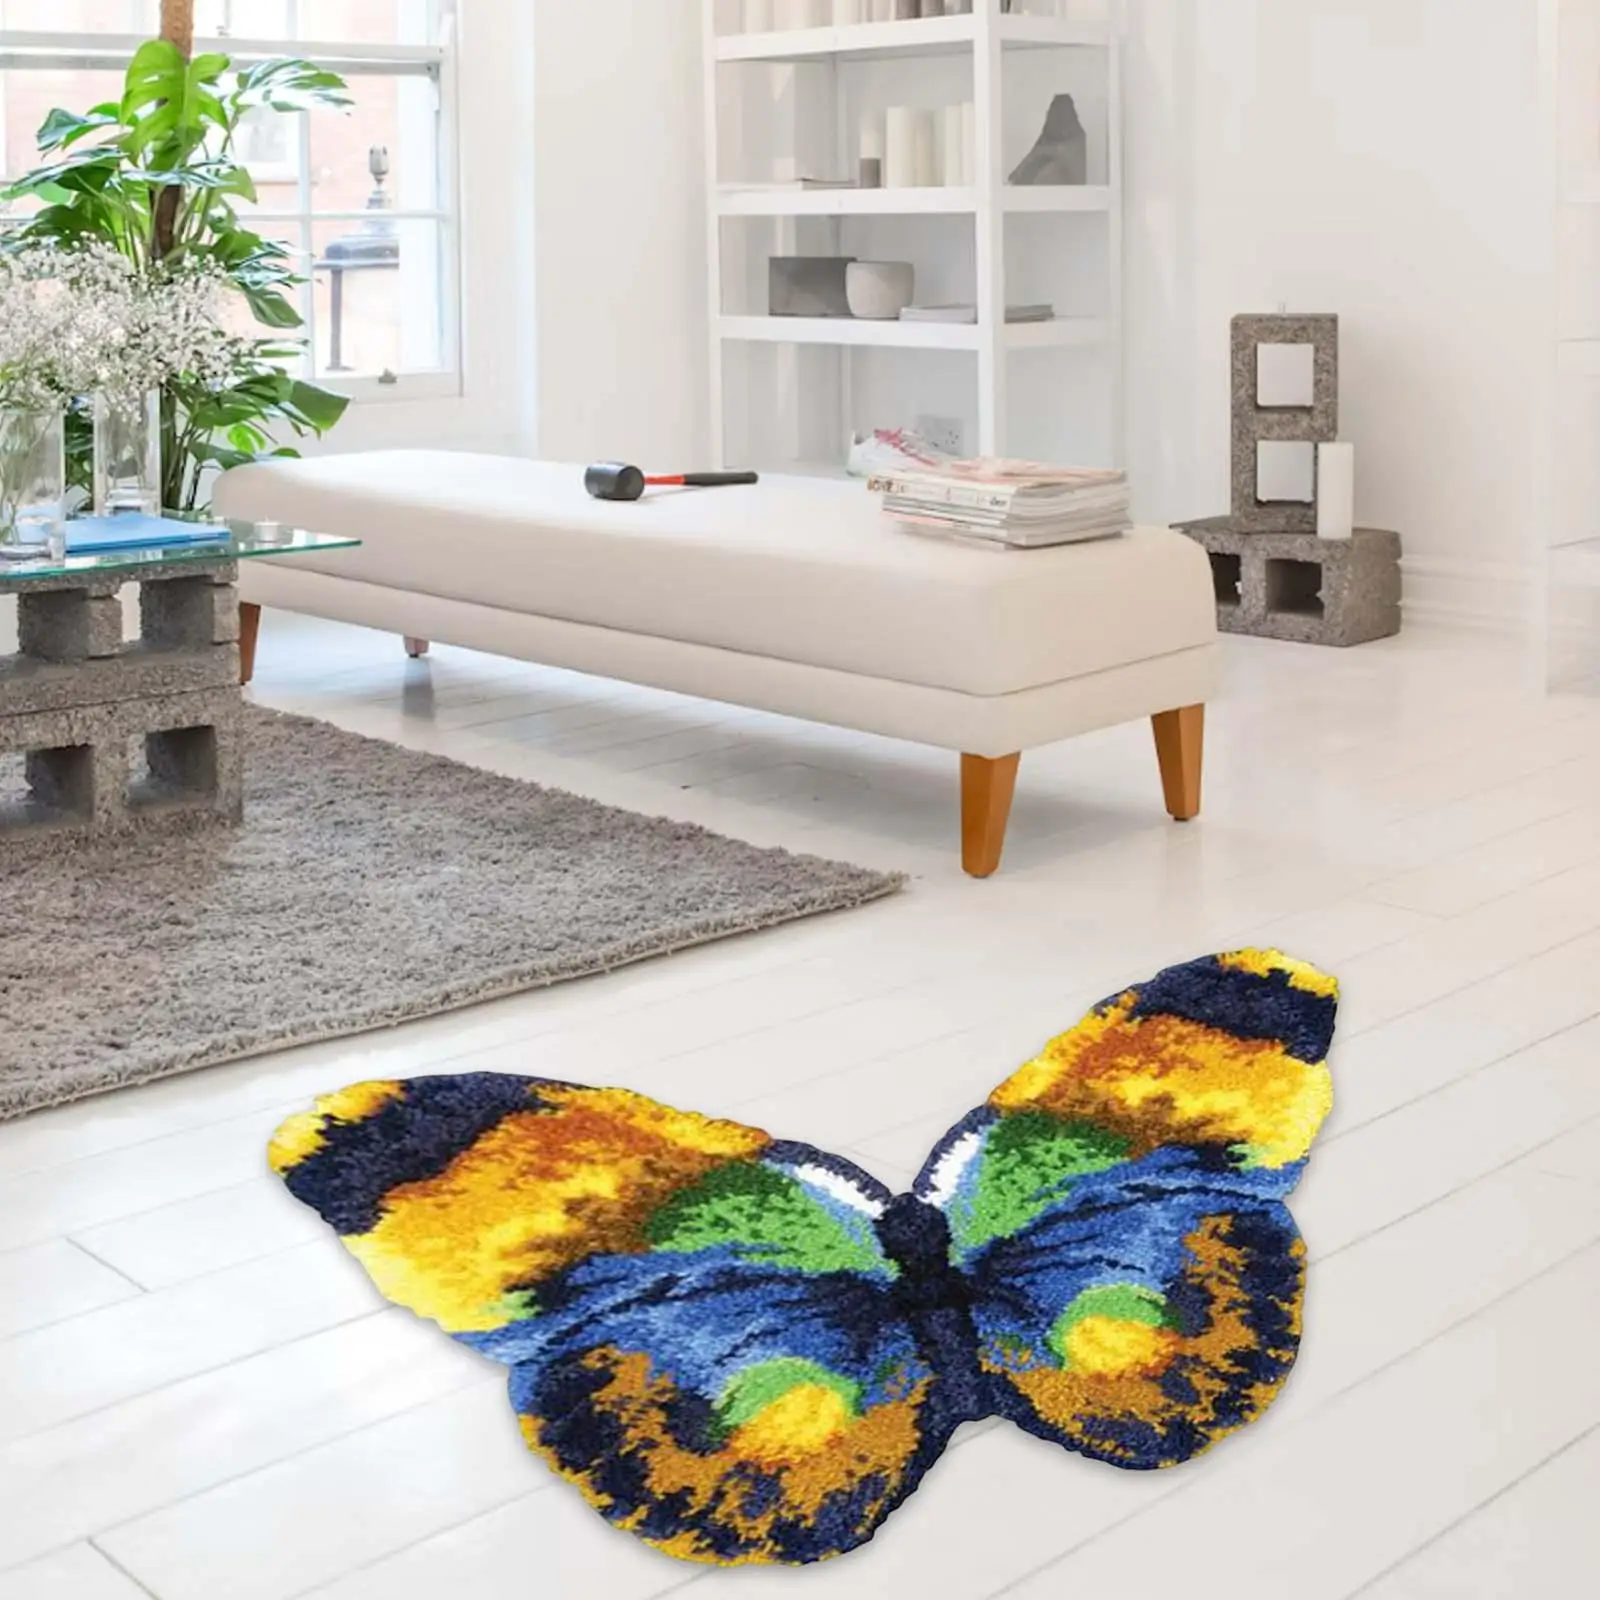 Latch DIY Rug Making Kit Butterfly Creative Carpet Making Kit Embroidery Carpet Set for Halloween Beginners Parents Adults